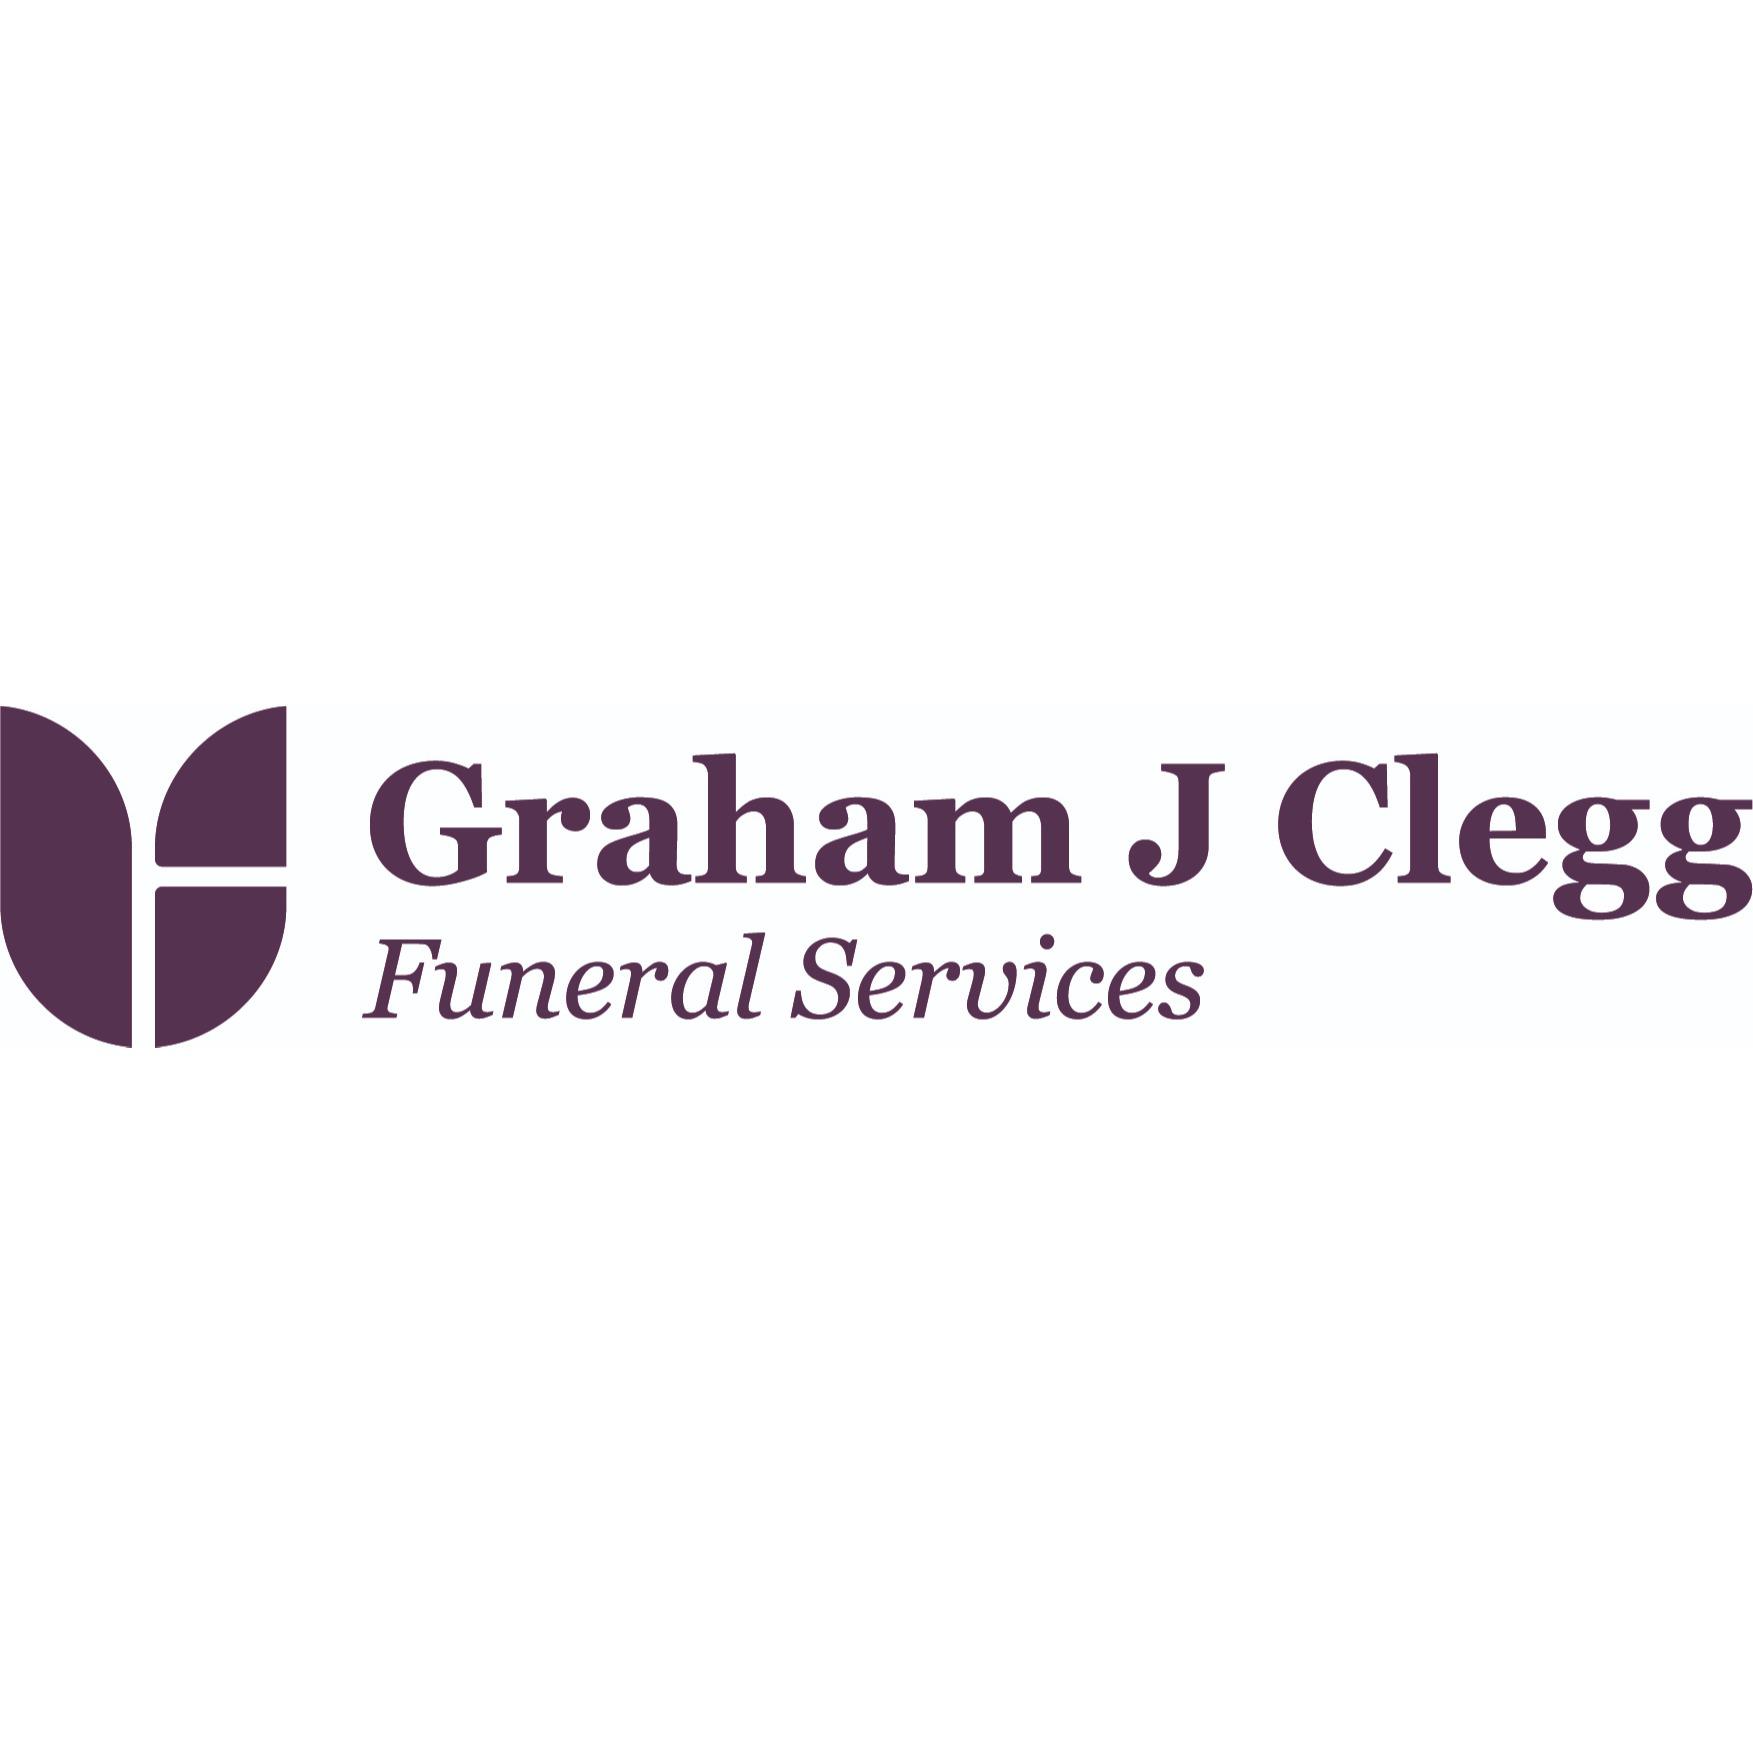 Graham J Clegg Funeral Services - Liverpool, Merseyside L31 0AE - 01513 514323 | ShowMeLocal.com